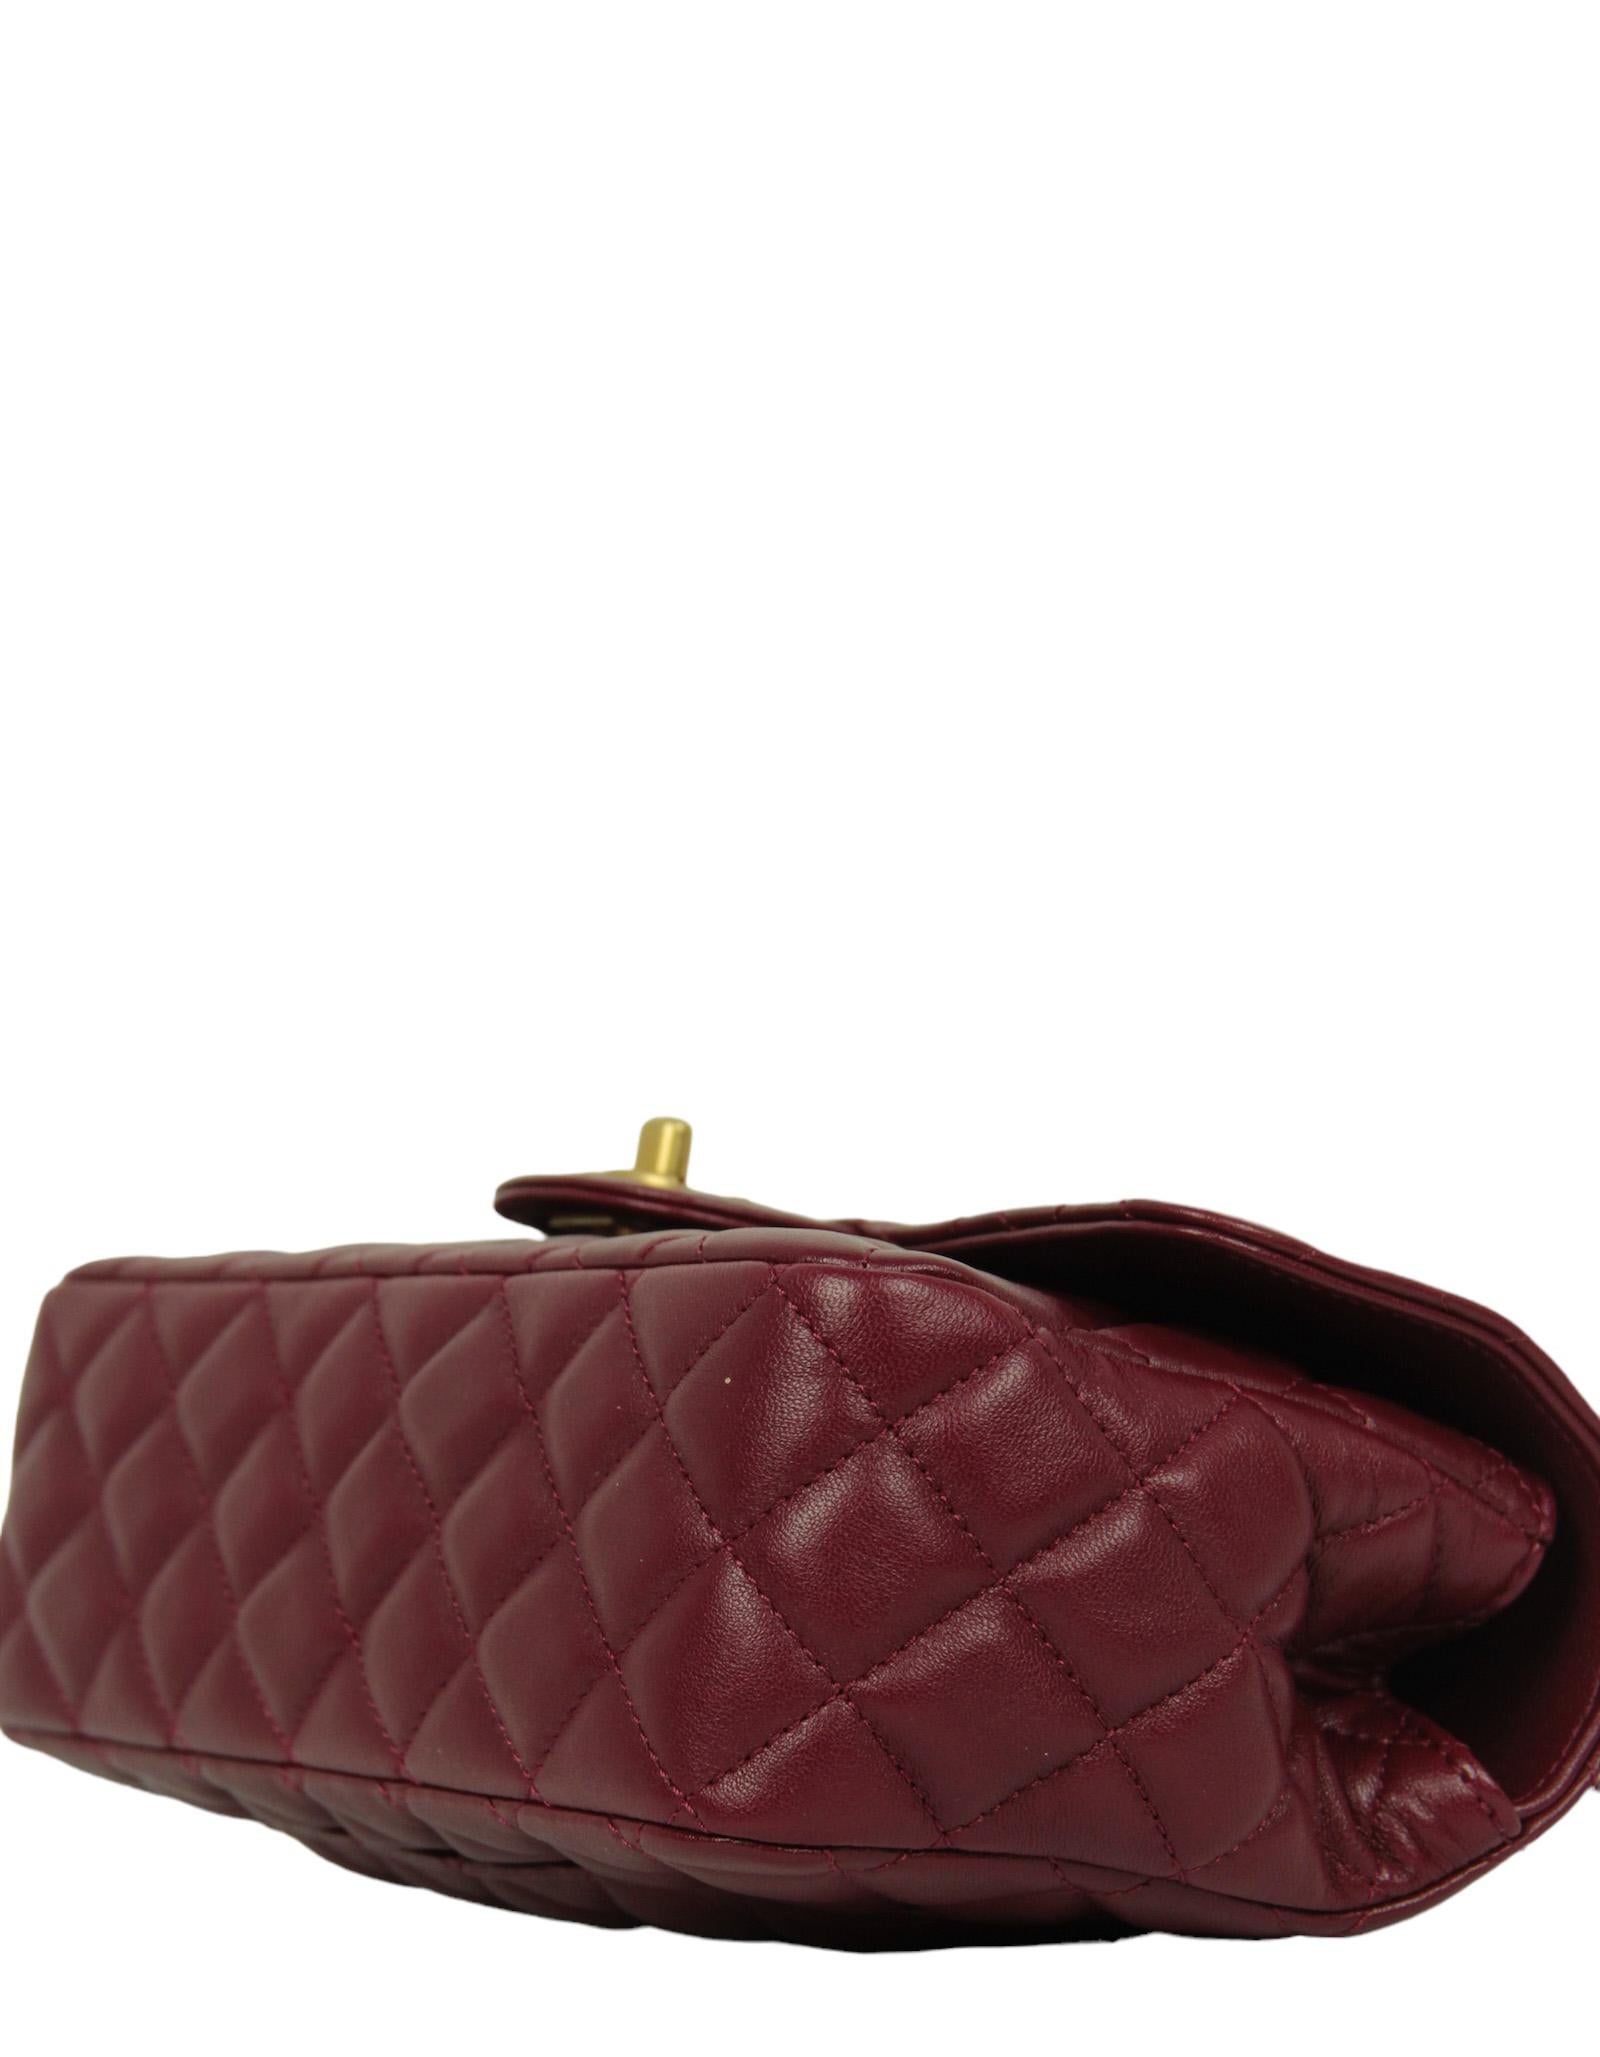 Chanel Burgundy Lambskin Leather Quilted Flapbag w/ Handle For Sale 1